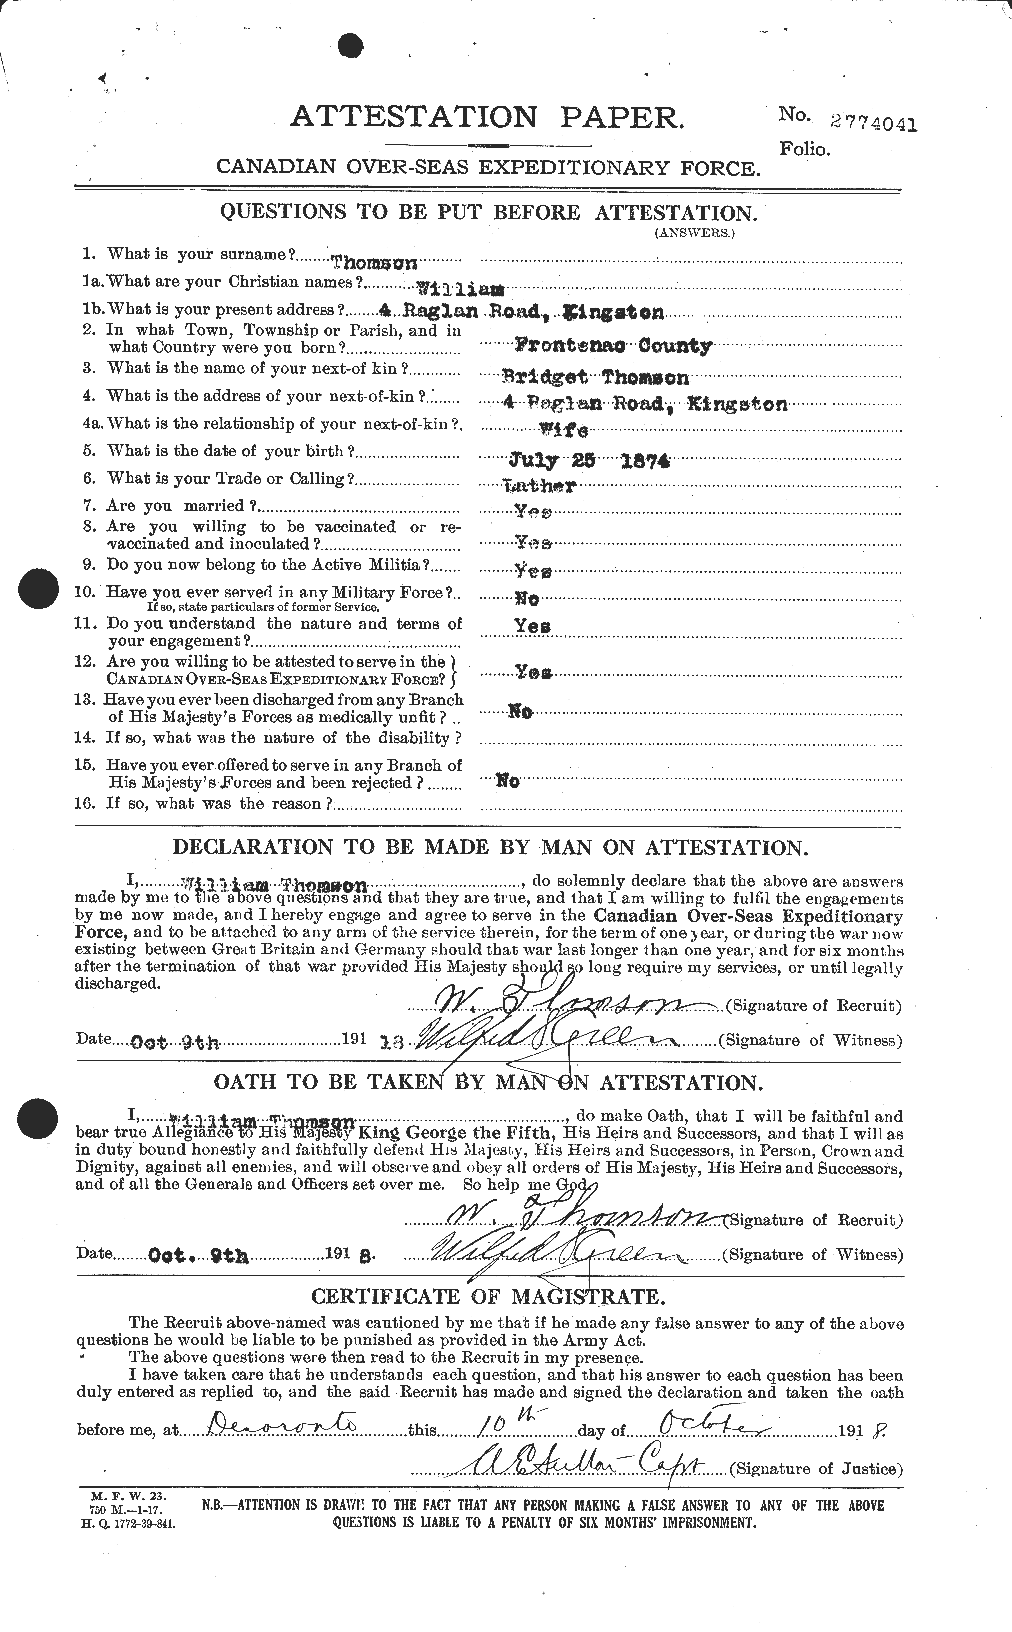 Personnel Records of the First World War - CEF 635573a